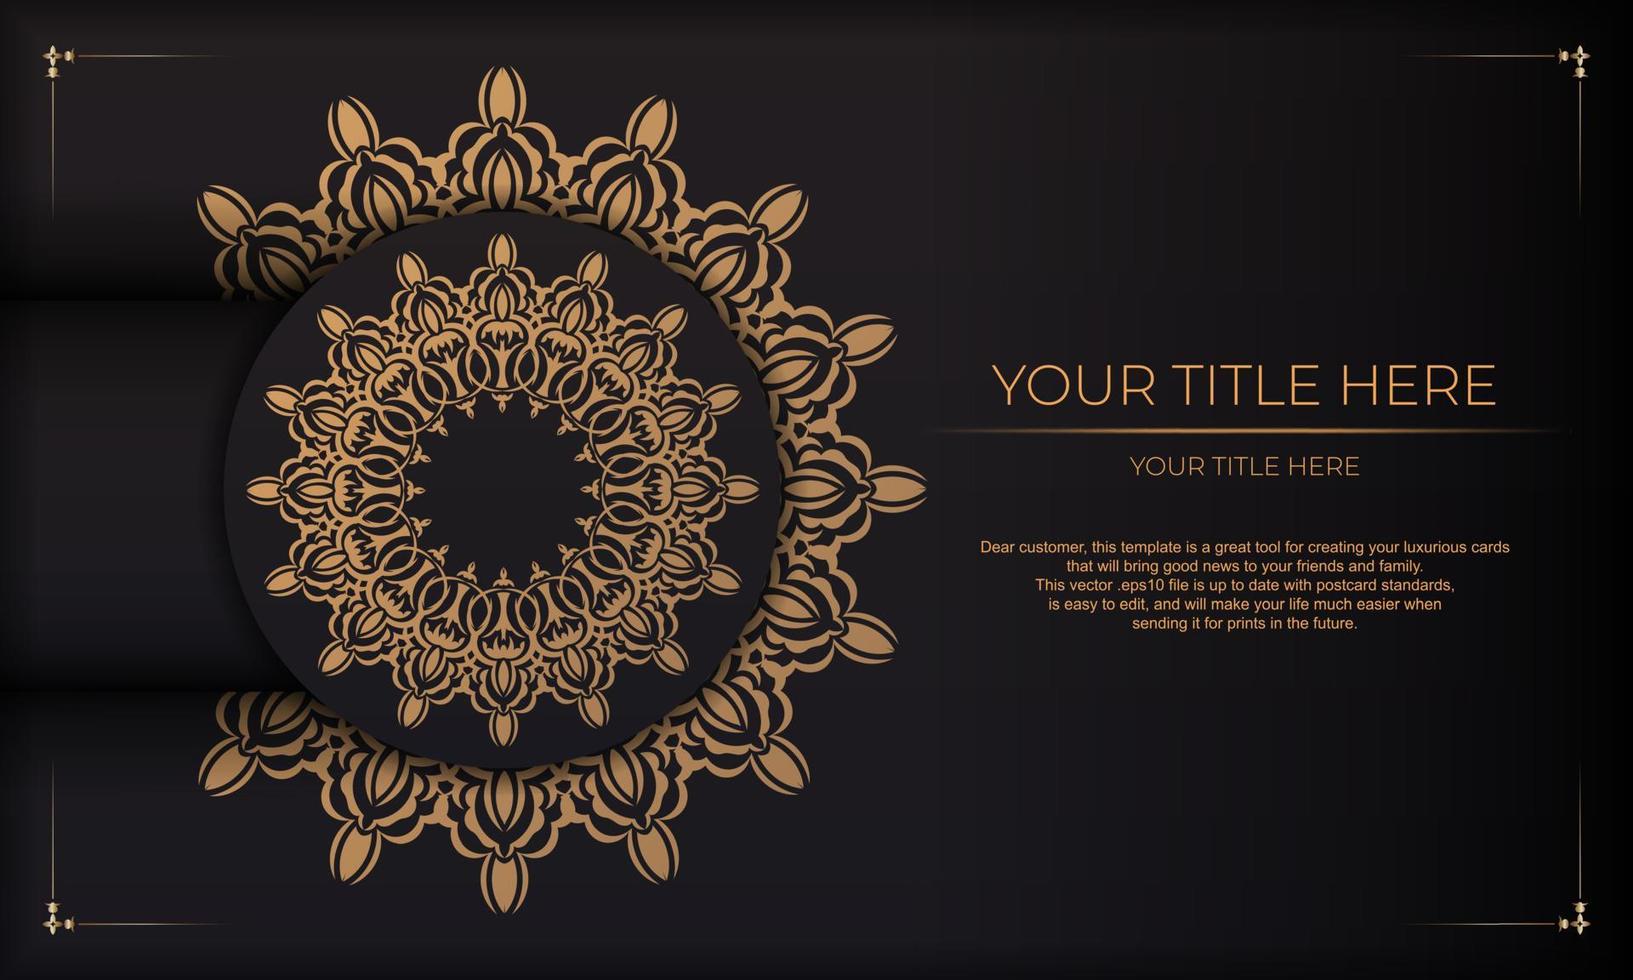 Luxurious background with vintage vintage ornaments and place for your design. Template for print design invitation card with mandala ornament. vector